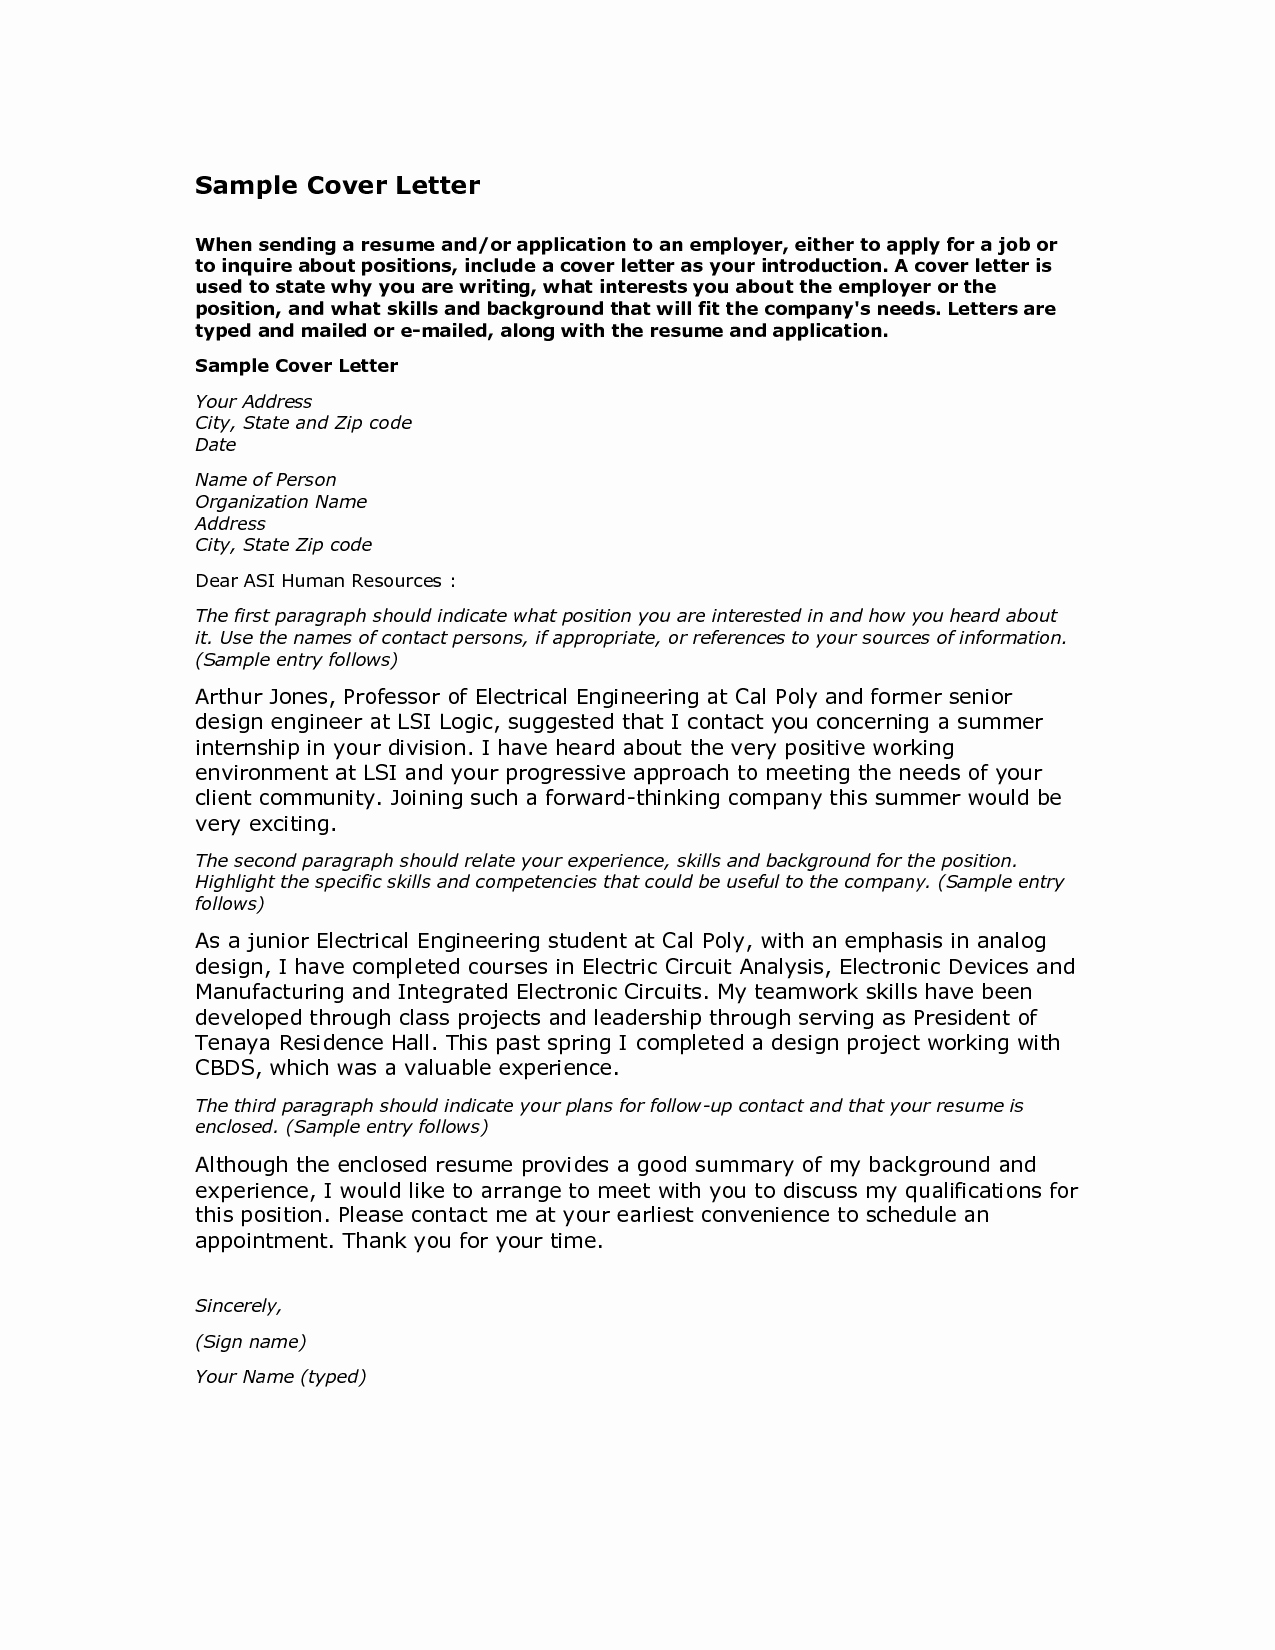 Free Job Cover Letter Template Awesome Cover Letter Sample Cover Letter for Job Application